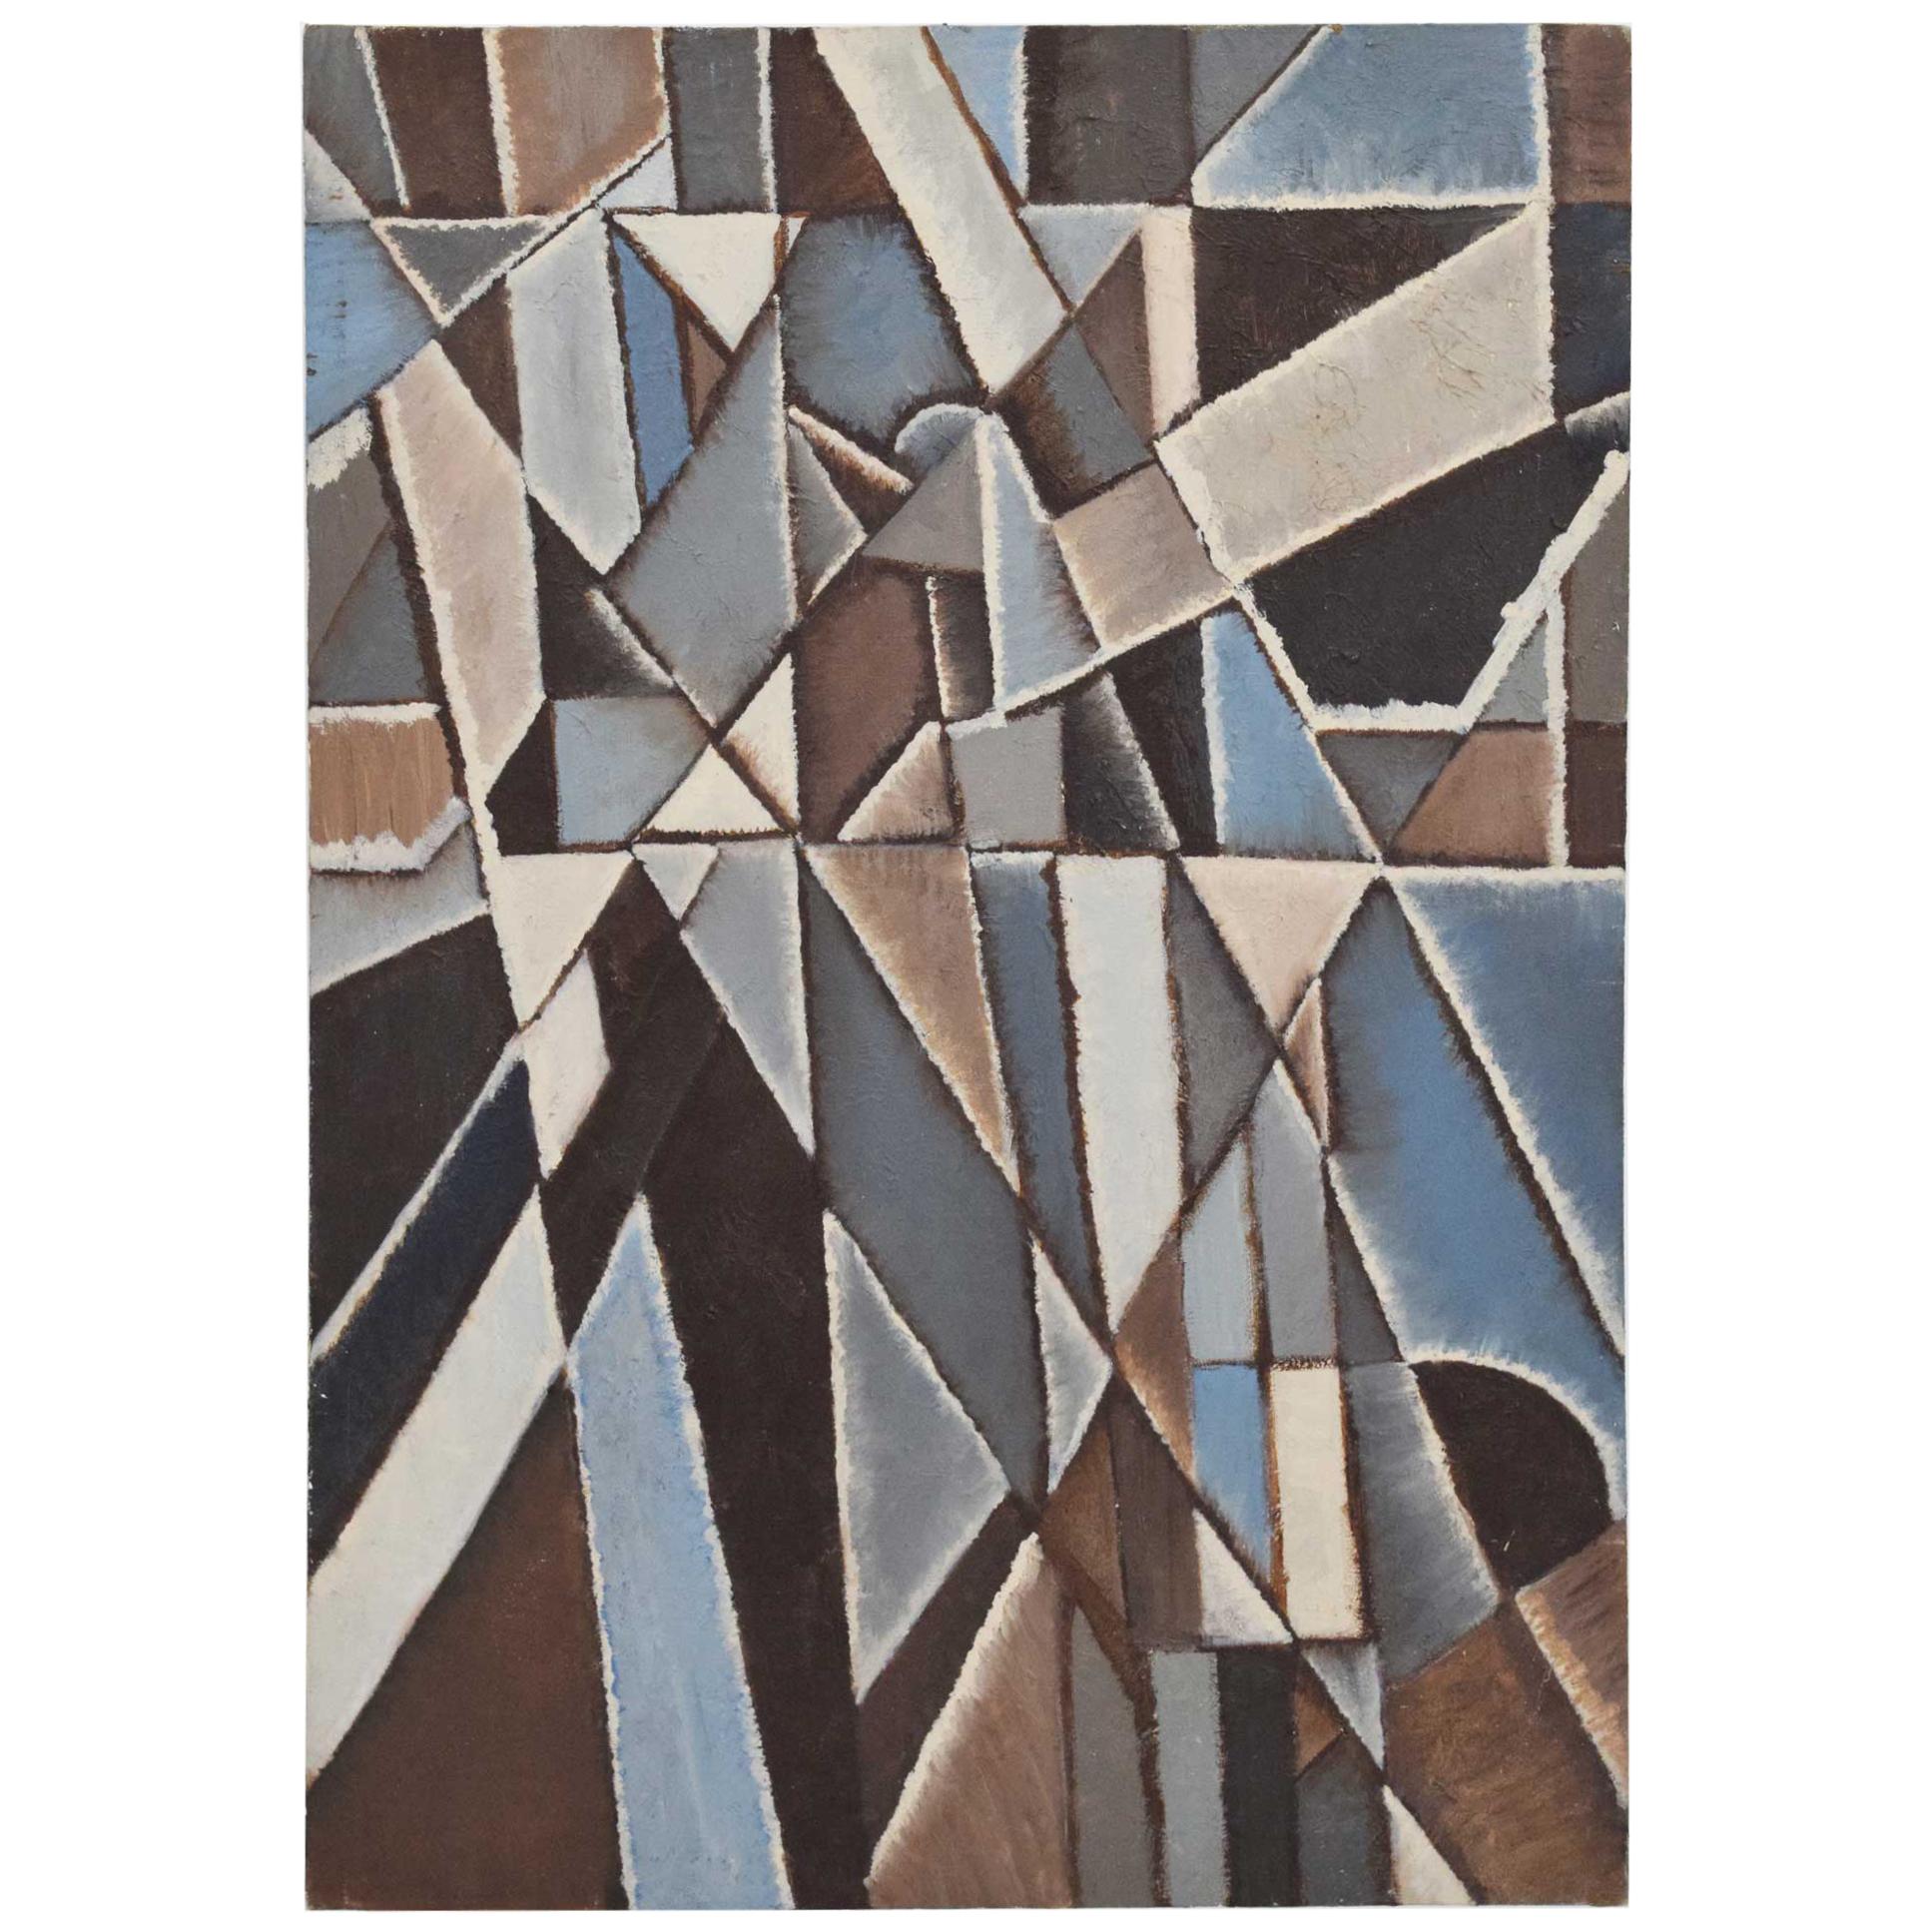 Midcentury New York School Abstract Modernist Cubist Oil Painting, 1960s